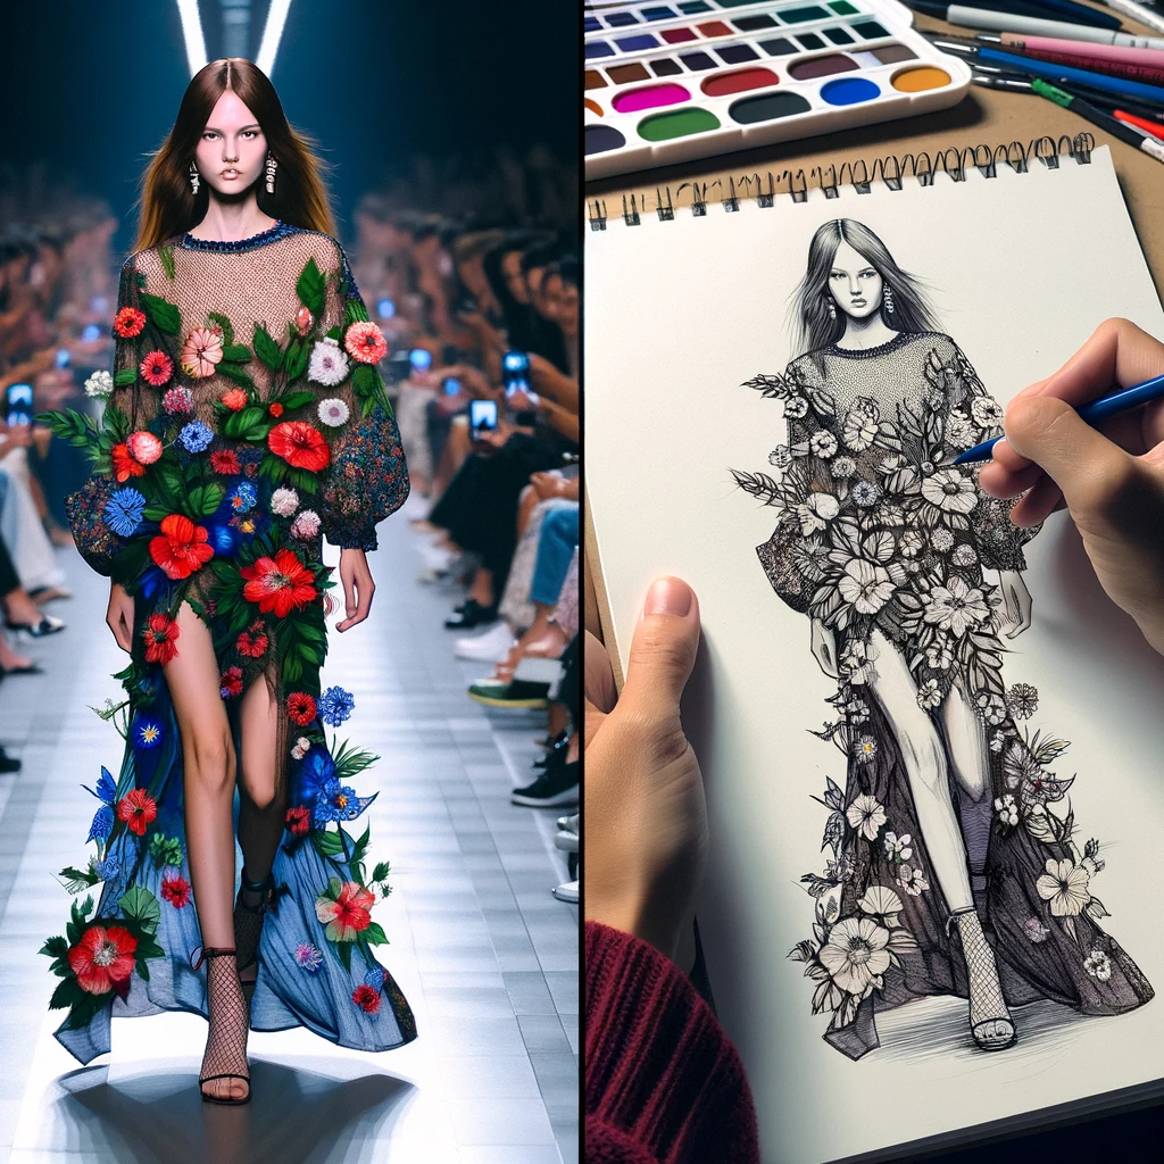 AI image that illustrates plagiarism in fashion. This is not a real photo